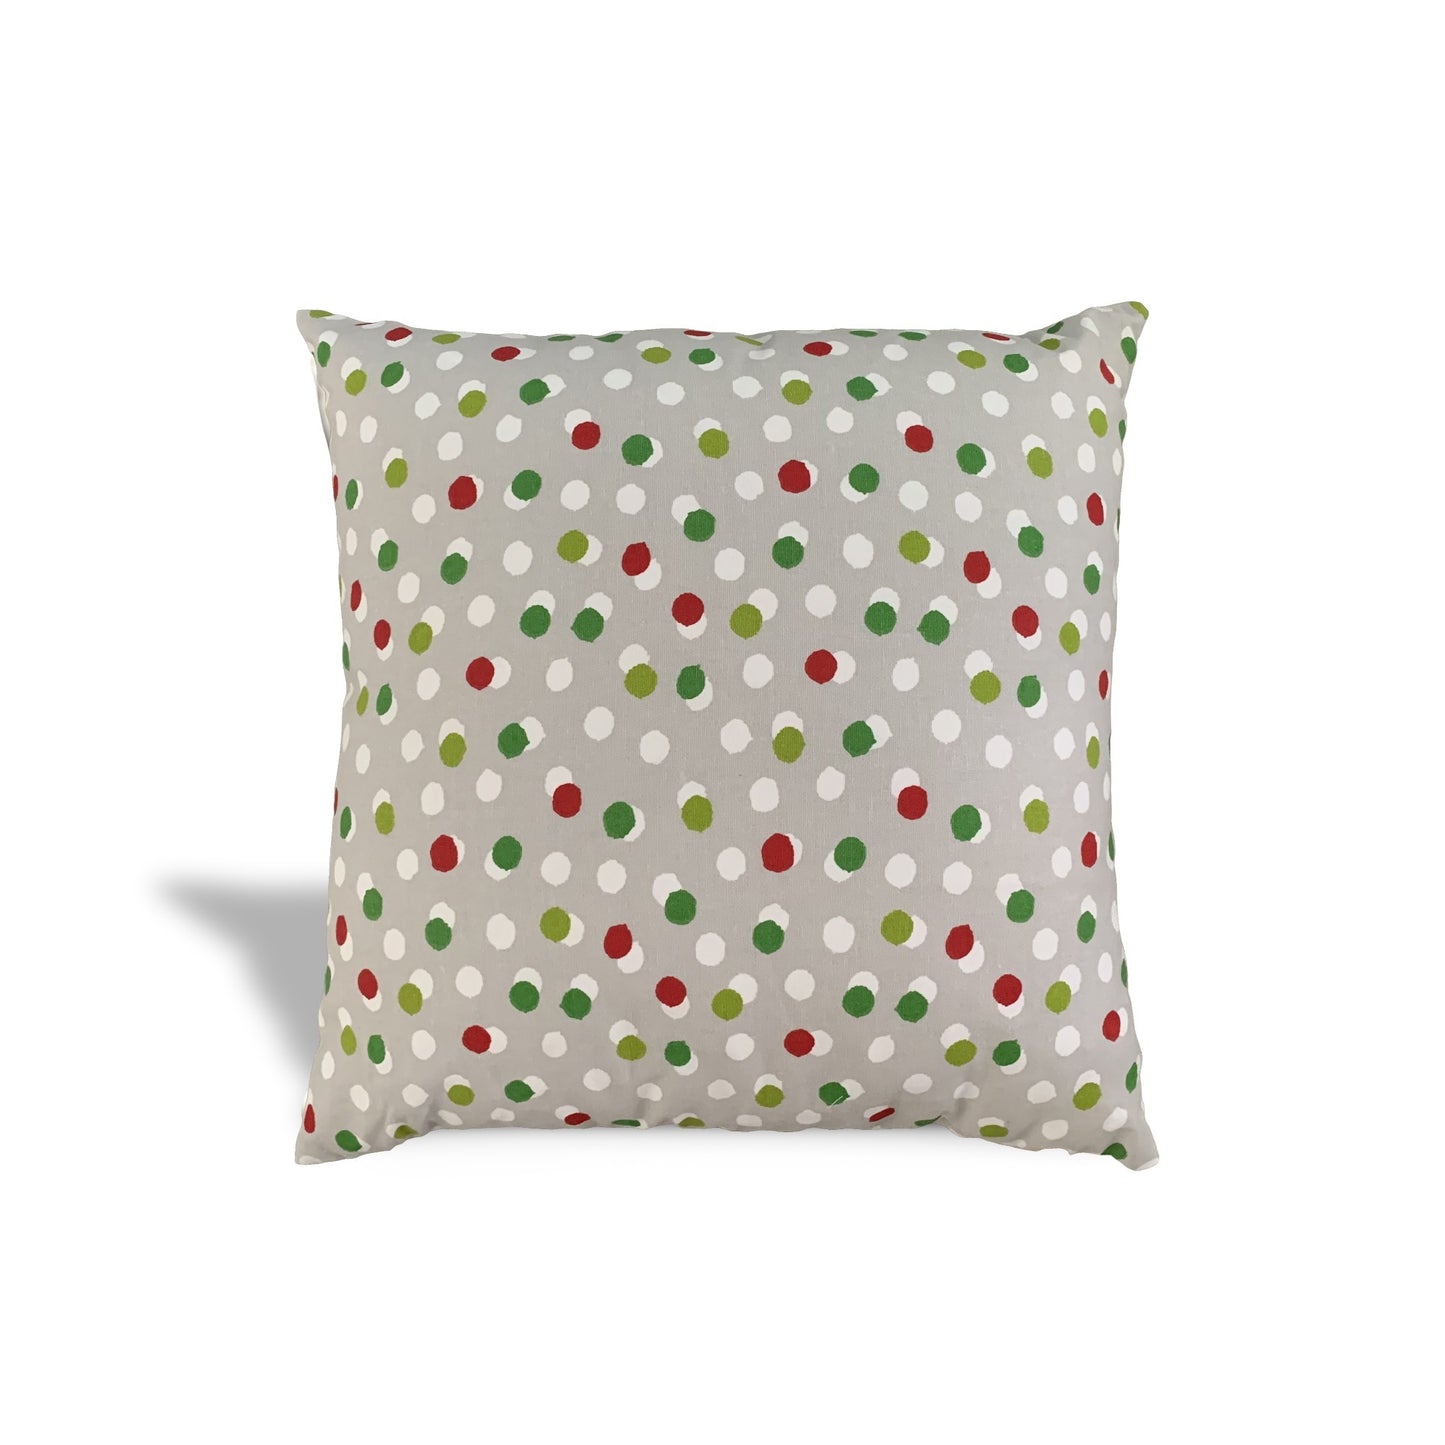 20" X 20" Red Gray And White Zippered 100% Cotton Polka Dots Throw Pillow Cover